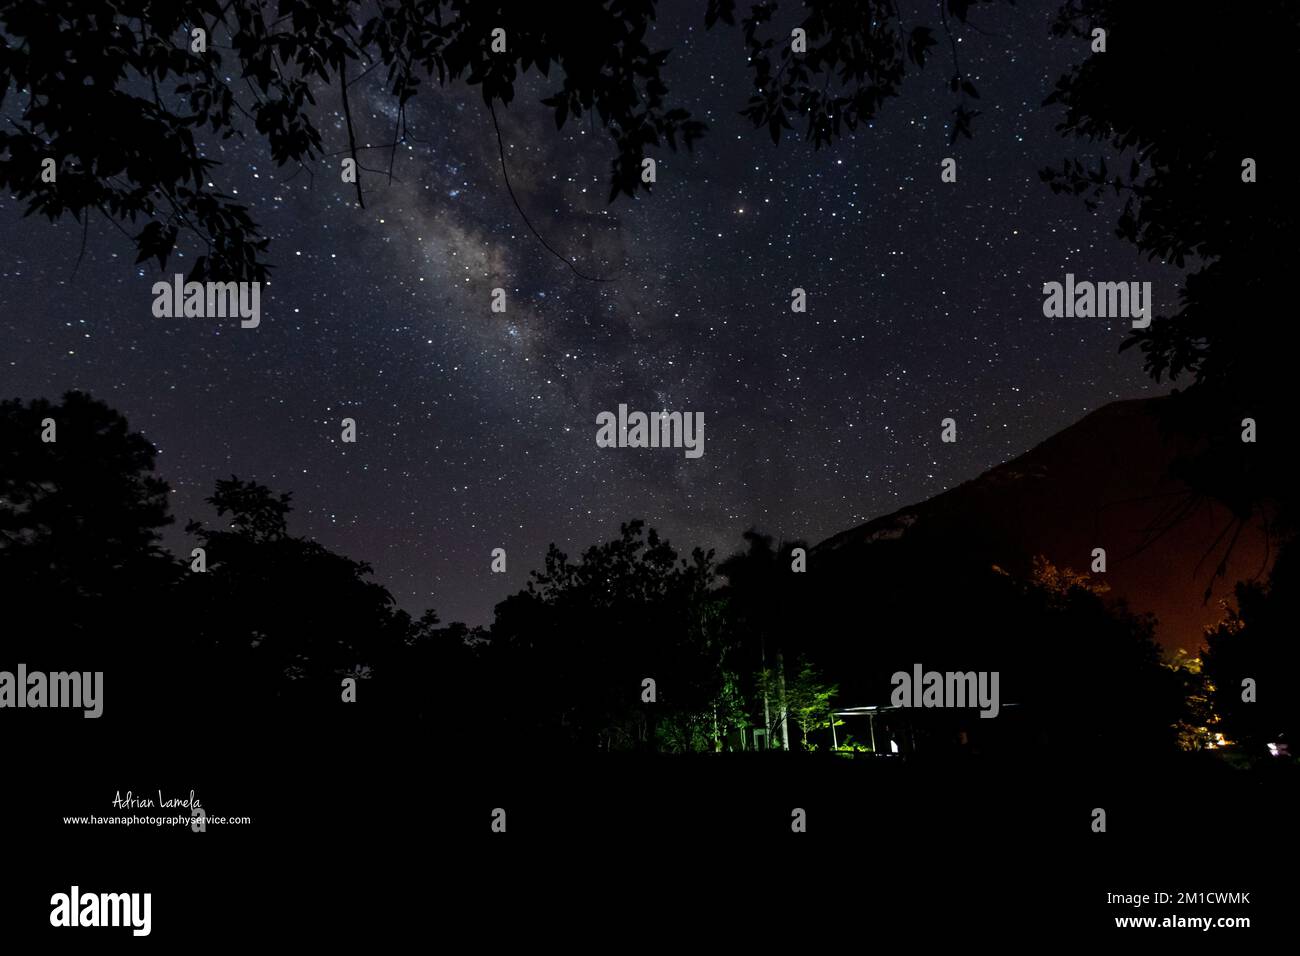 A beautiful vista starry night sky over silhouette trees in the park Stock Photo